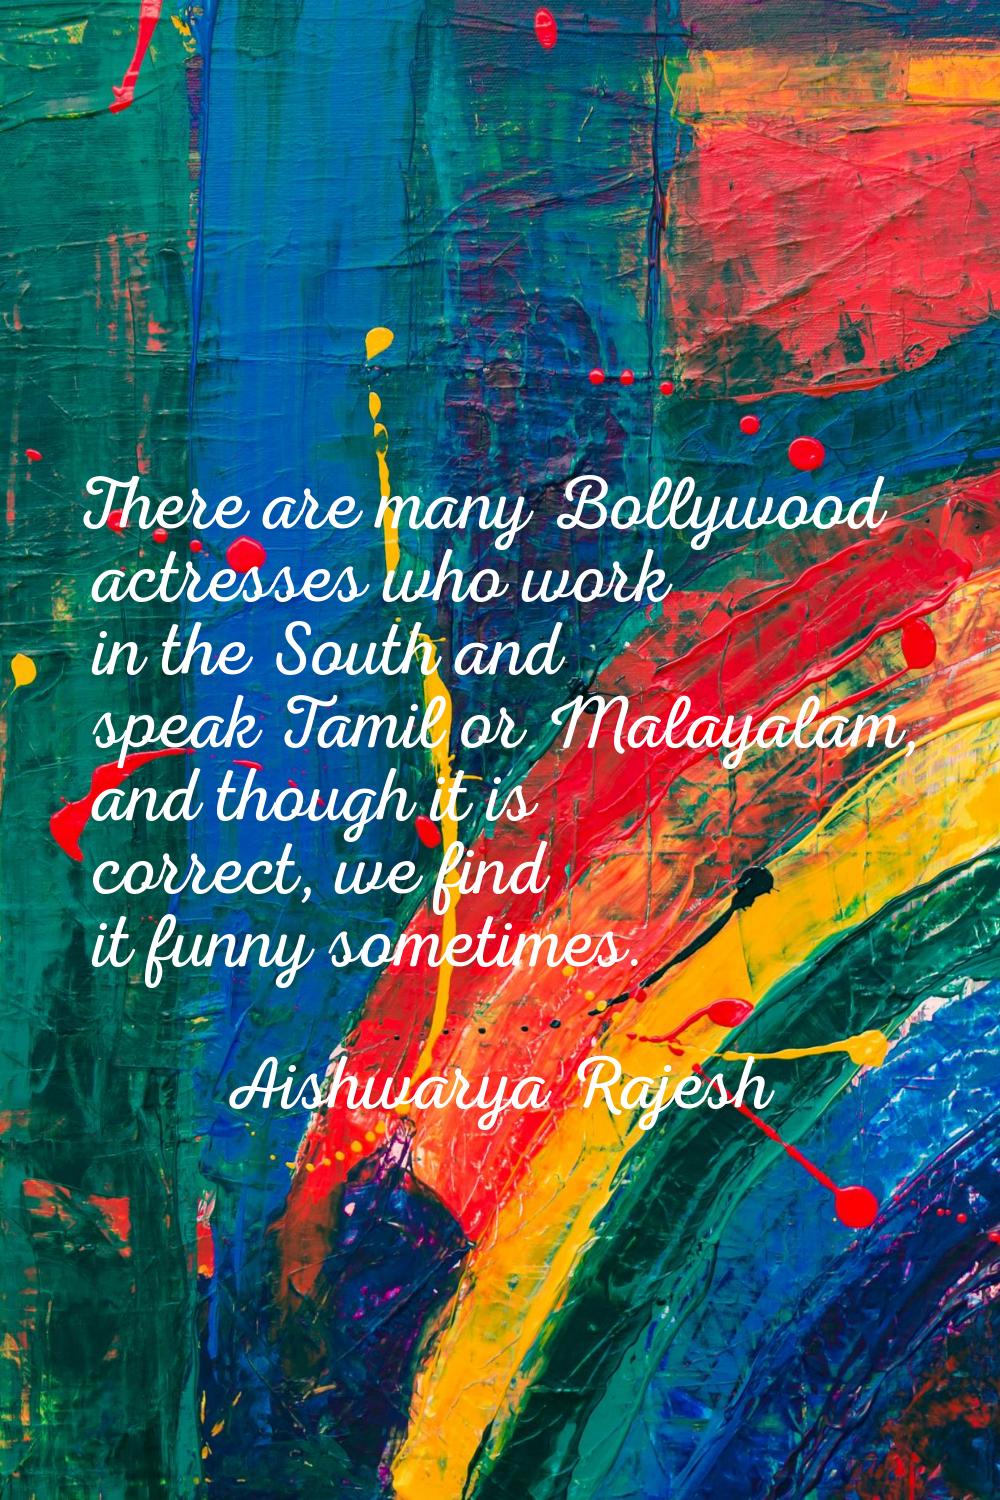 There are many Bollywood actresses who work in the South and speak Tamil or Malayalam, and though i